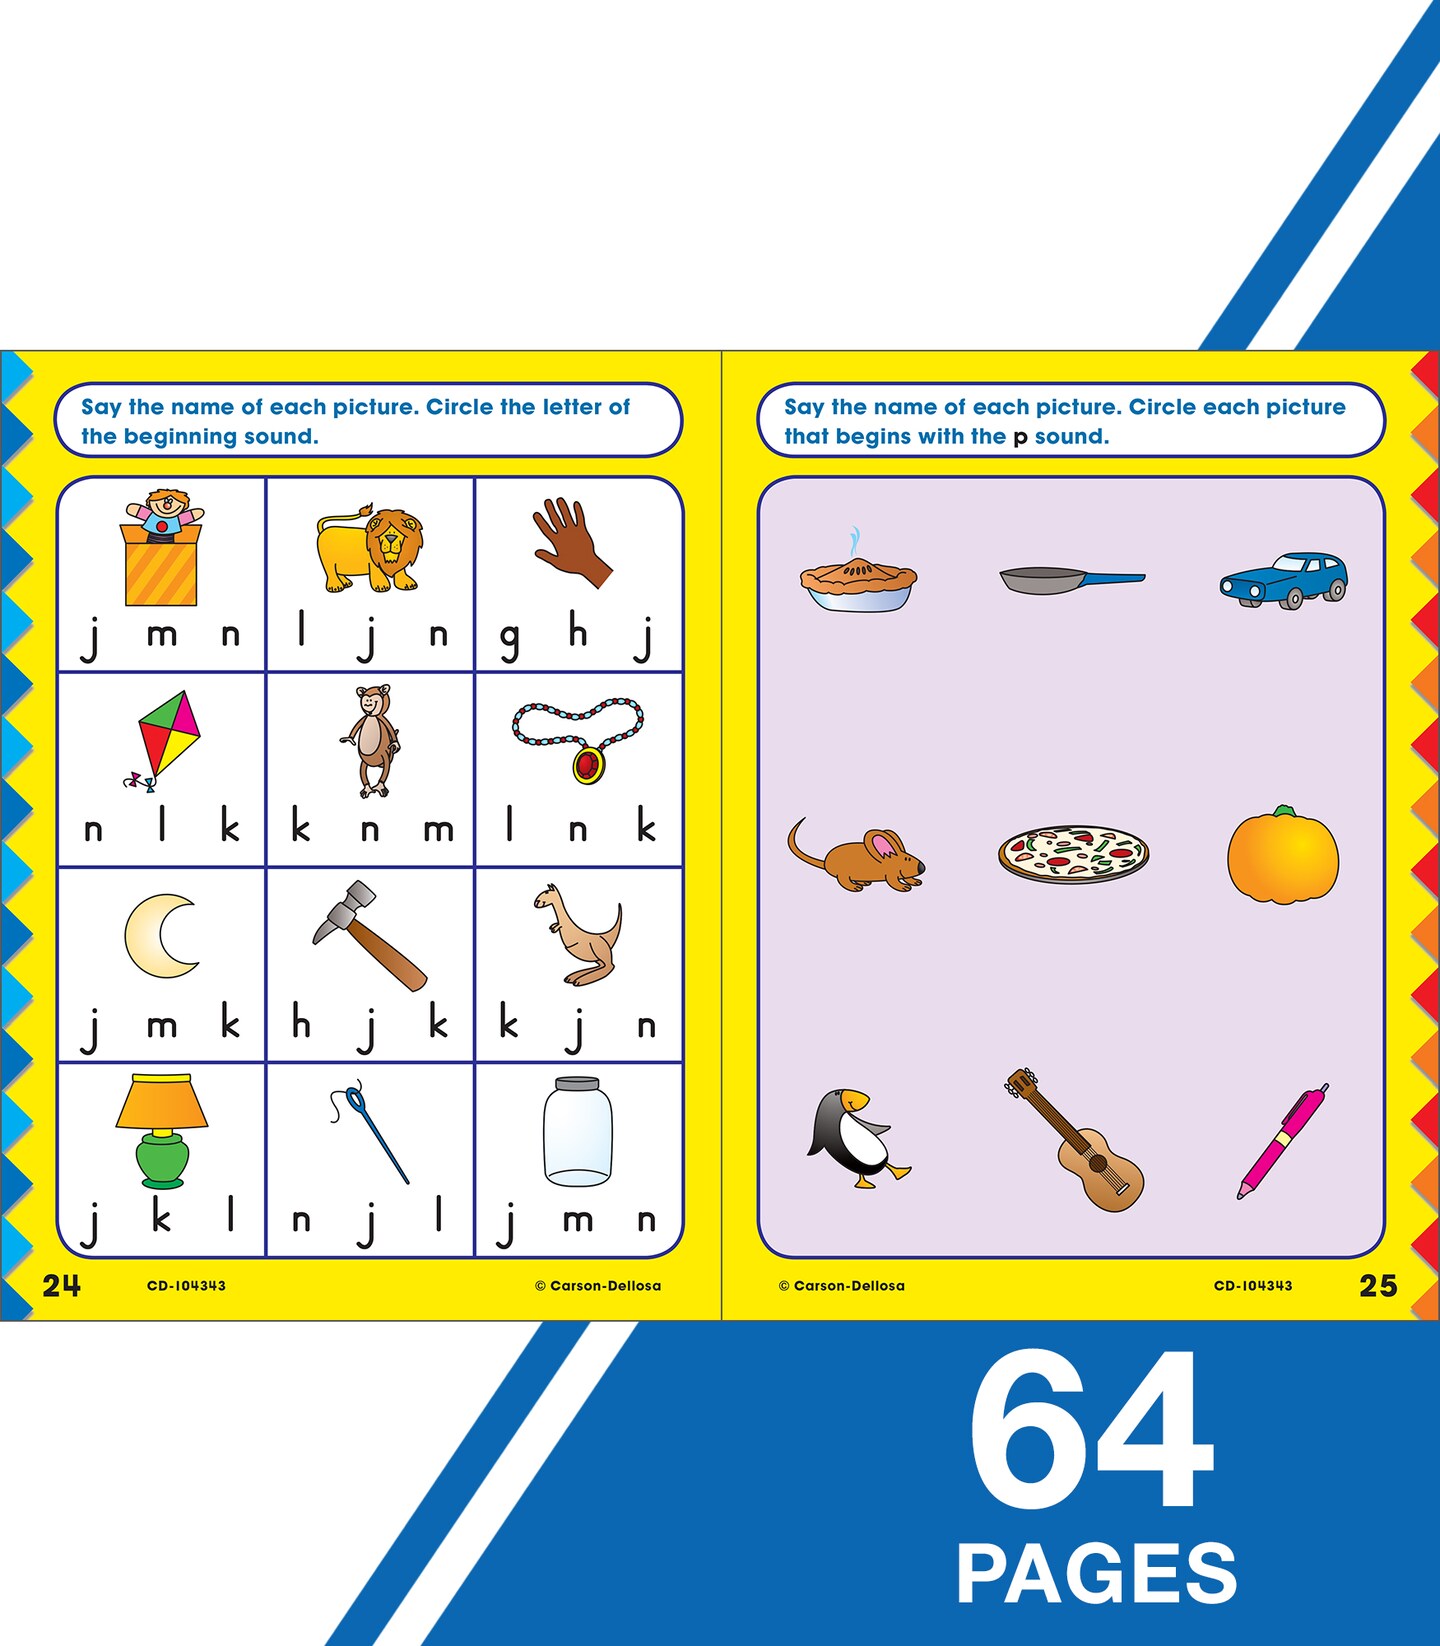 Phonics Workbook for Kindergarten, Sight Words, Tracing Letters, Consonant and Vowel Sounds, Writing Practice With Incentive Chart and Reward Stickers, Homeschool or Classroom Kindergarten Curriculum